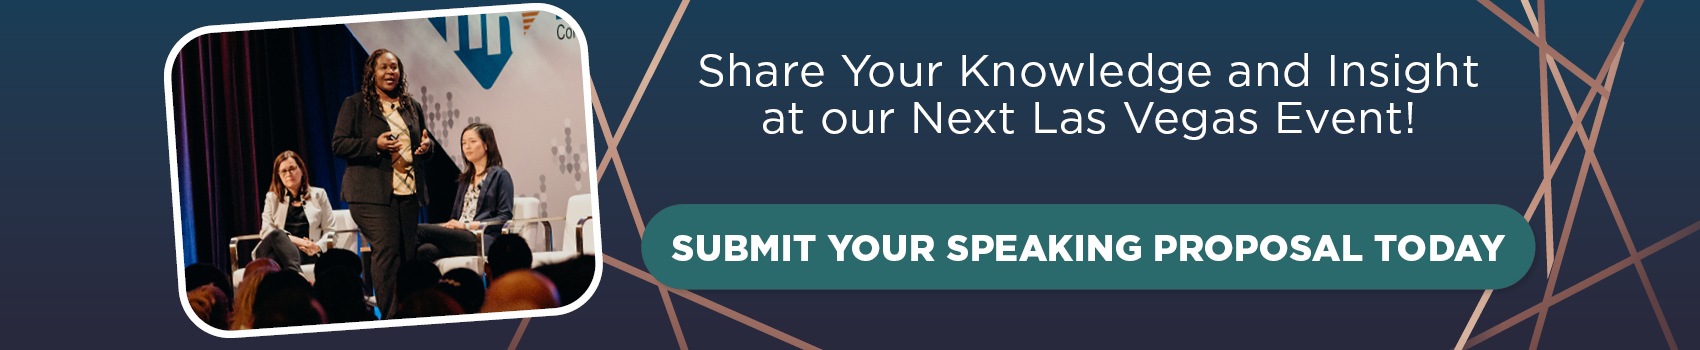 Share Your Knowledge and Insight at our Next Las Vegas Event! SUBMIT YOUR SPEAKING PROPOSAL TODAY